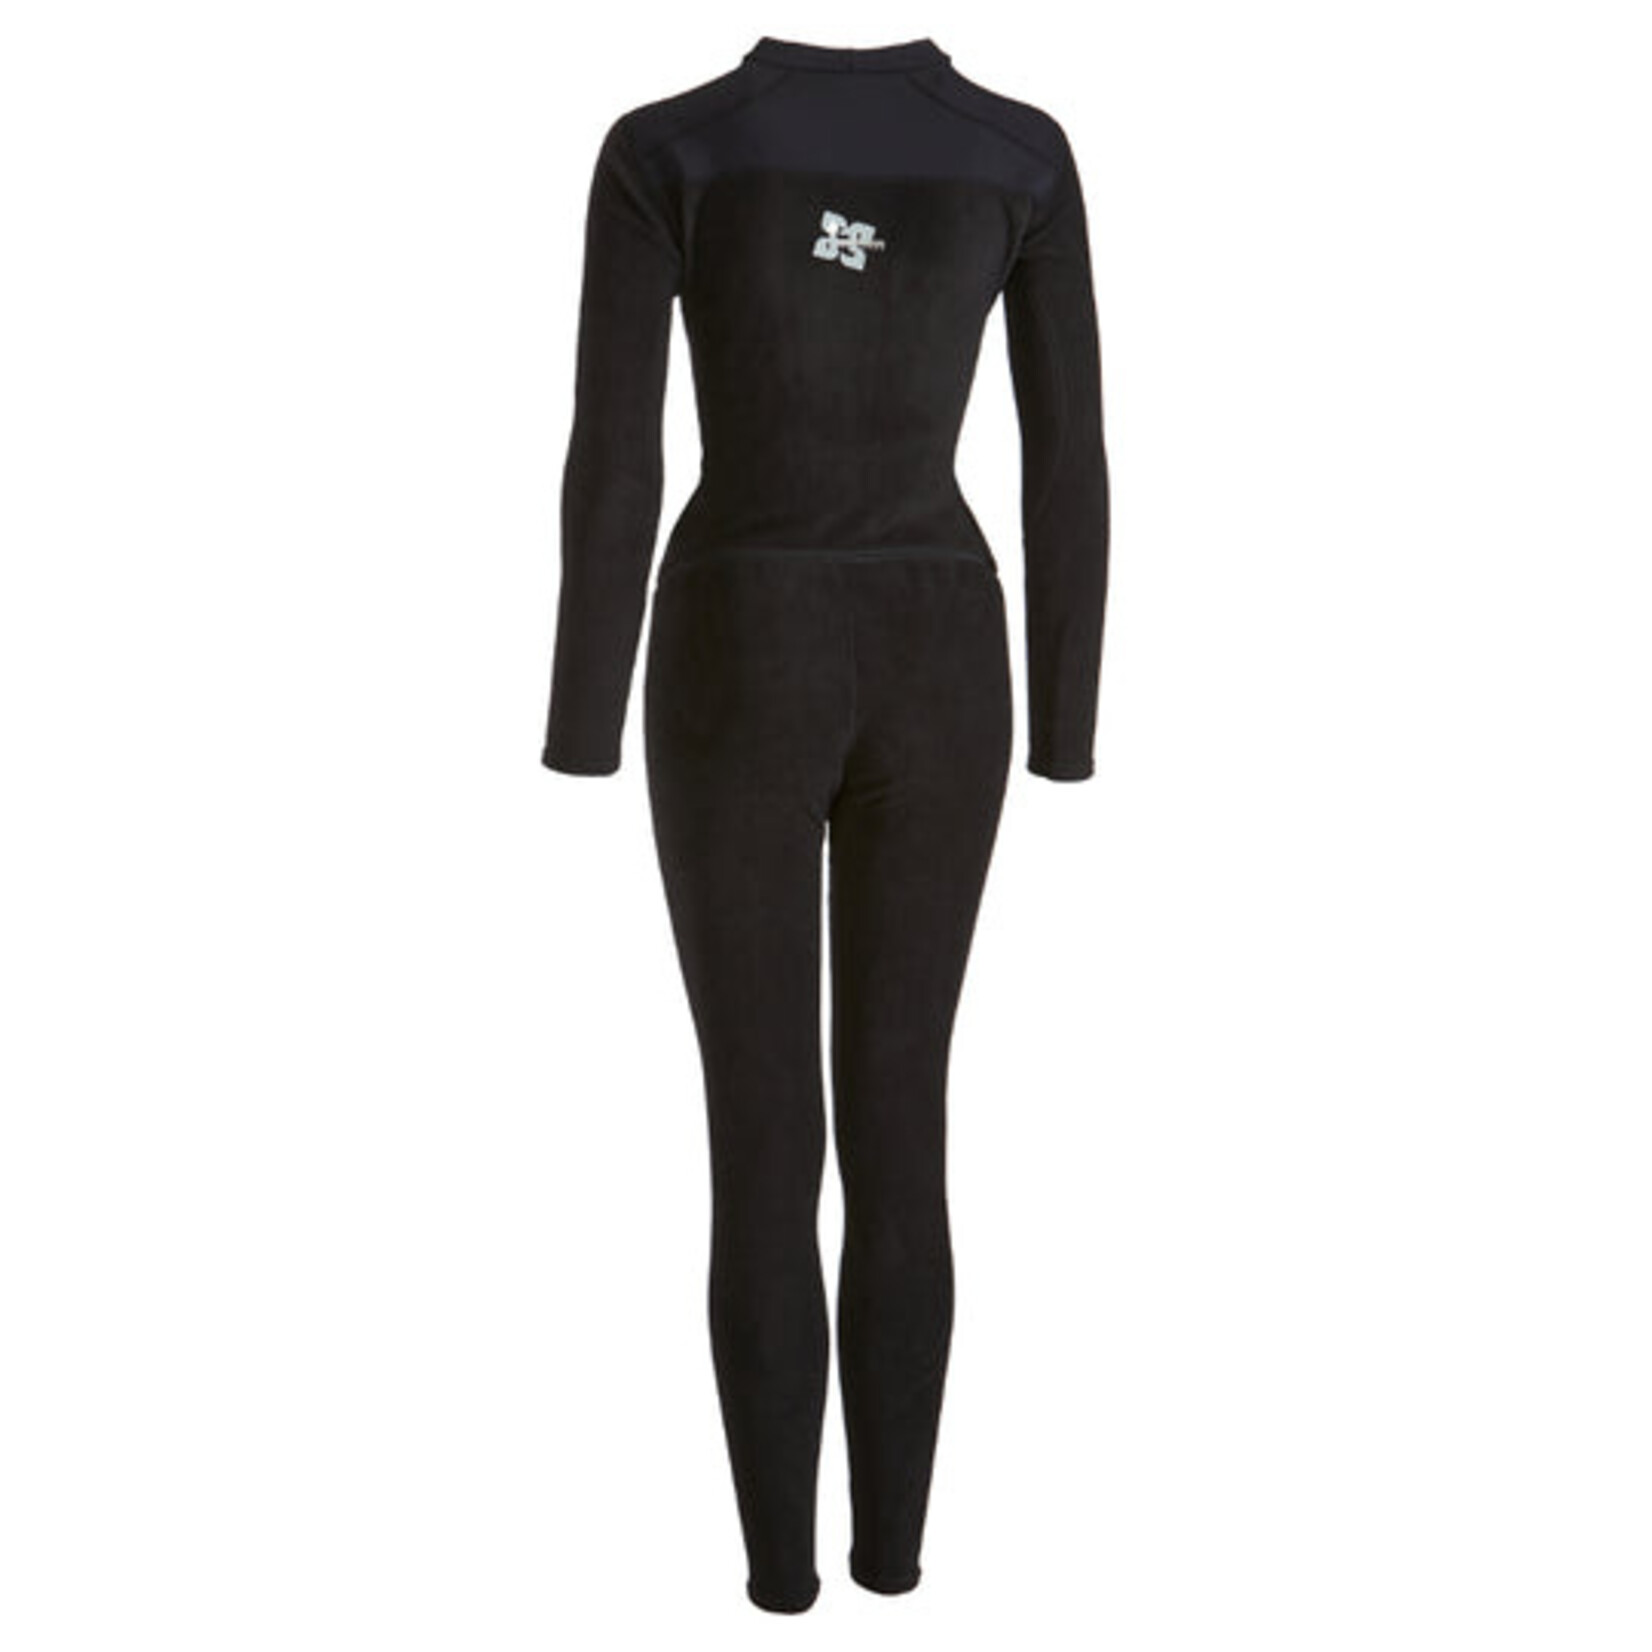 Immersion Research Immersion Research Women's Thick Skin Union Suit with Relief Zipper